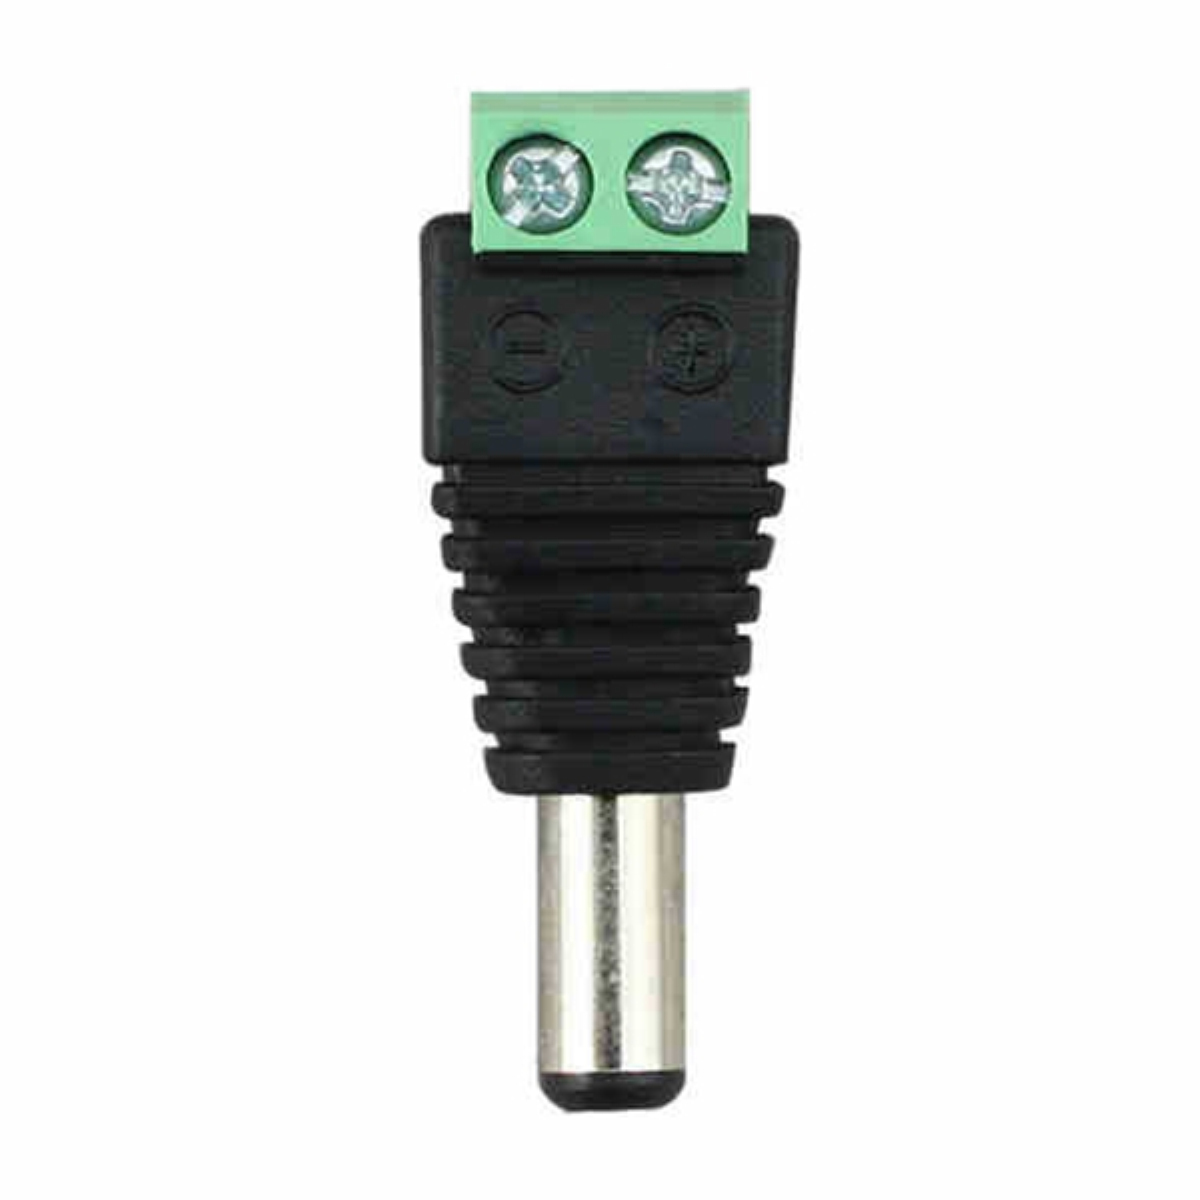 DC5-24V-5A-Human-Infrared-Motion-Sensor-Controller-LED-Strip-Light-Switch--5521mm-Male-Connector-1399653